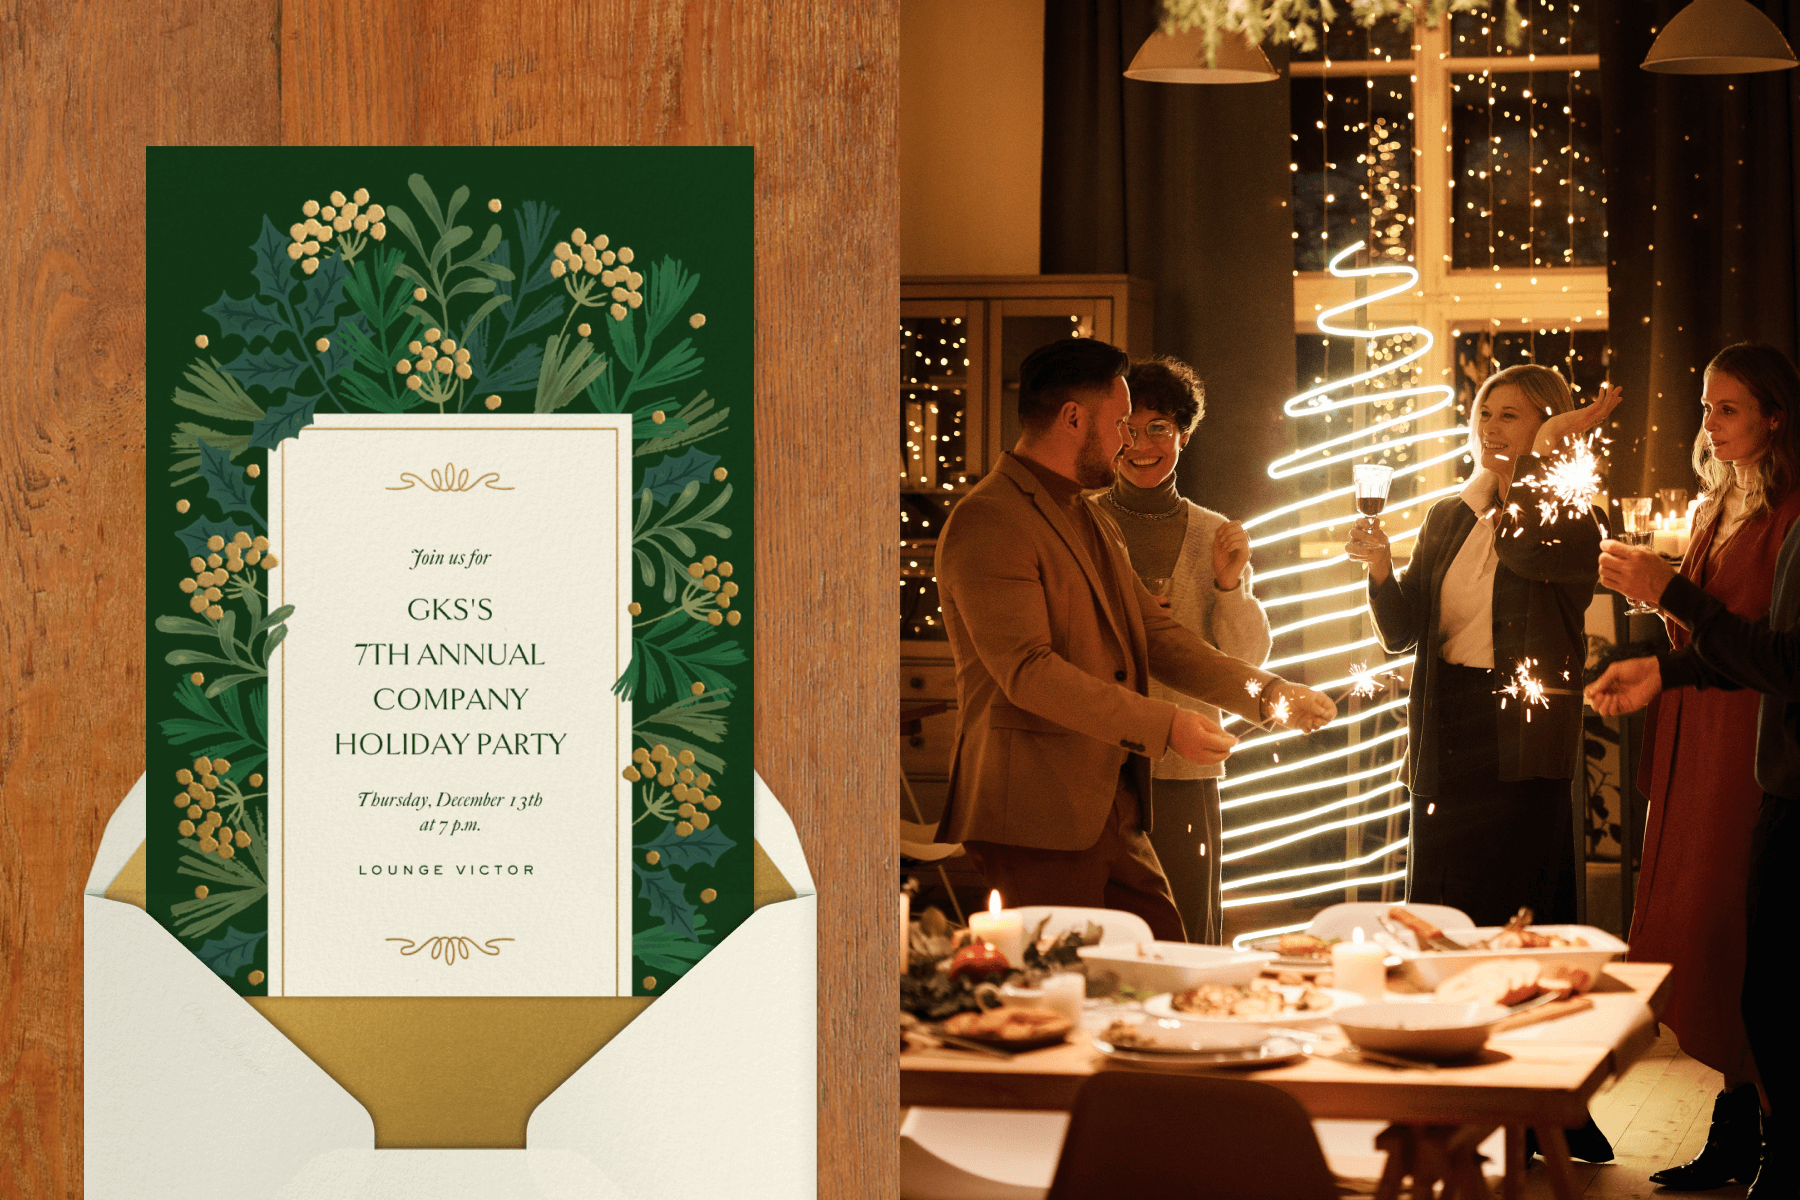 Left: A green invitation for “GKS’s 7th annual company holiday party” has a wide interior border of holly, fir sprigs, and gold berries. Right: Four people hold glasses and sparklers near a tablw of food in a room with white string lights.